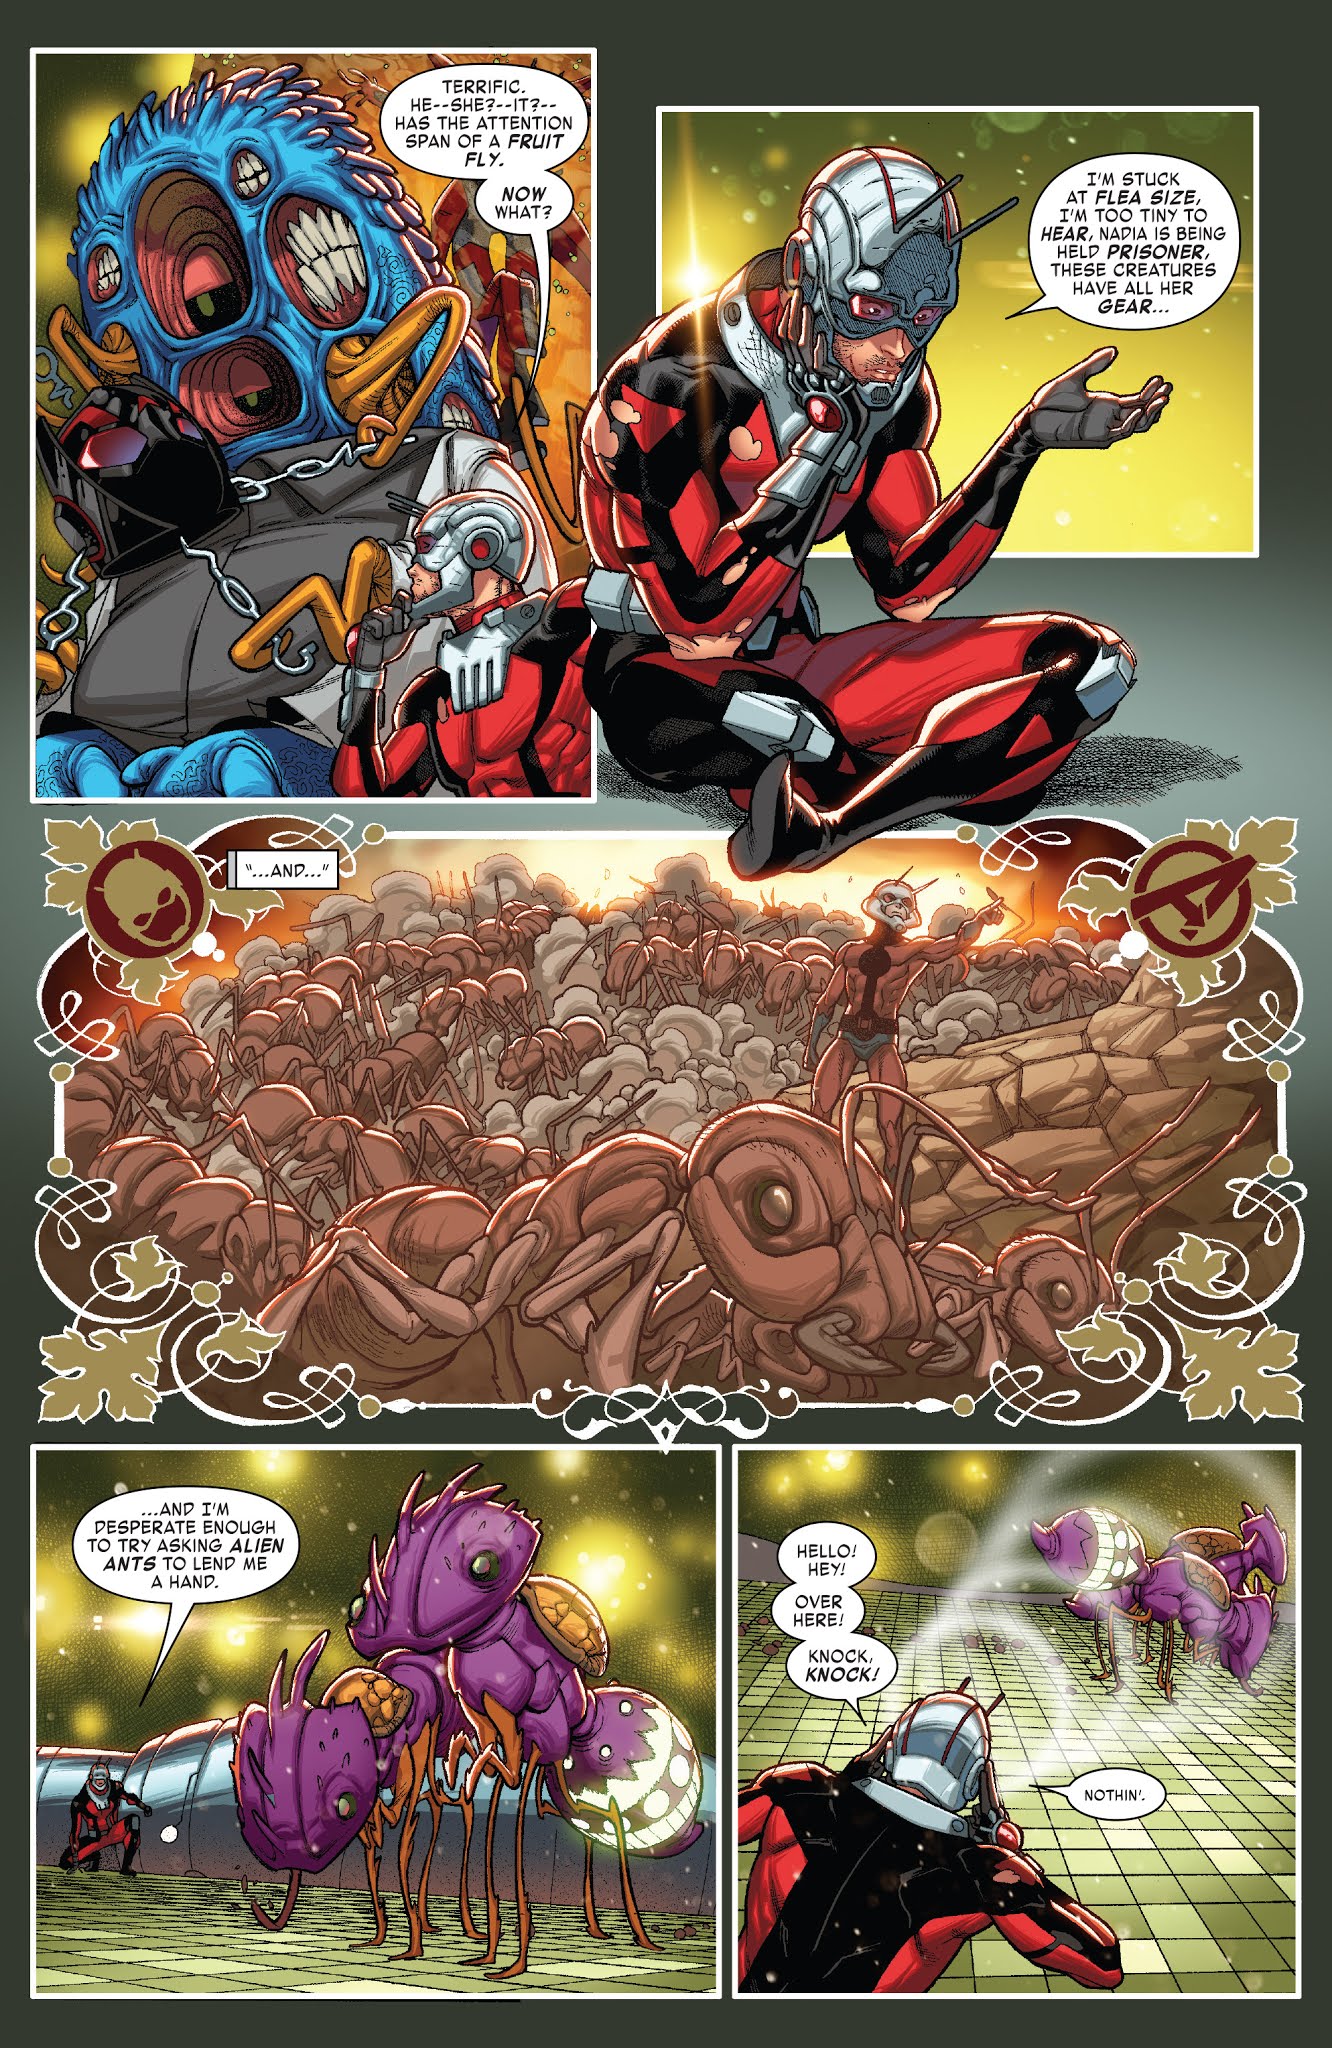 Ant Man The Wasp Issue 3 | Read Ant Man The Wasp Issue 3 comic online in  high quality. Read Full Comic online for free - Read comics online in high  quality .